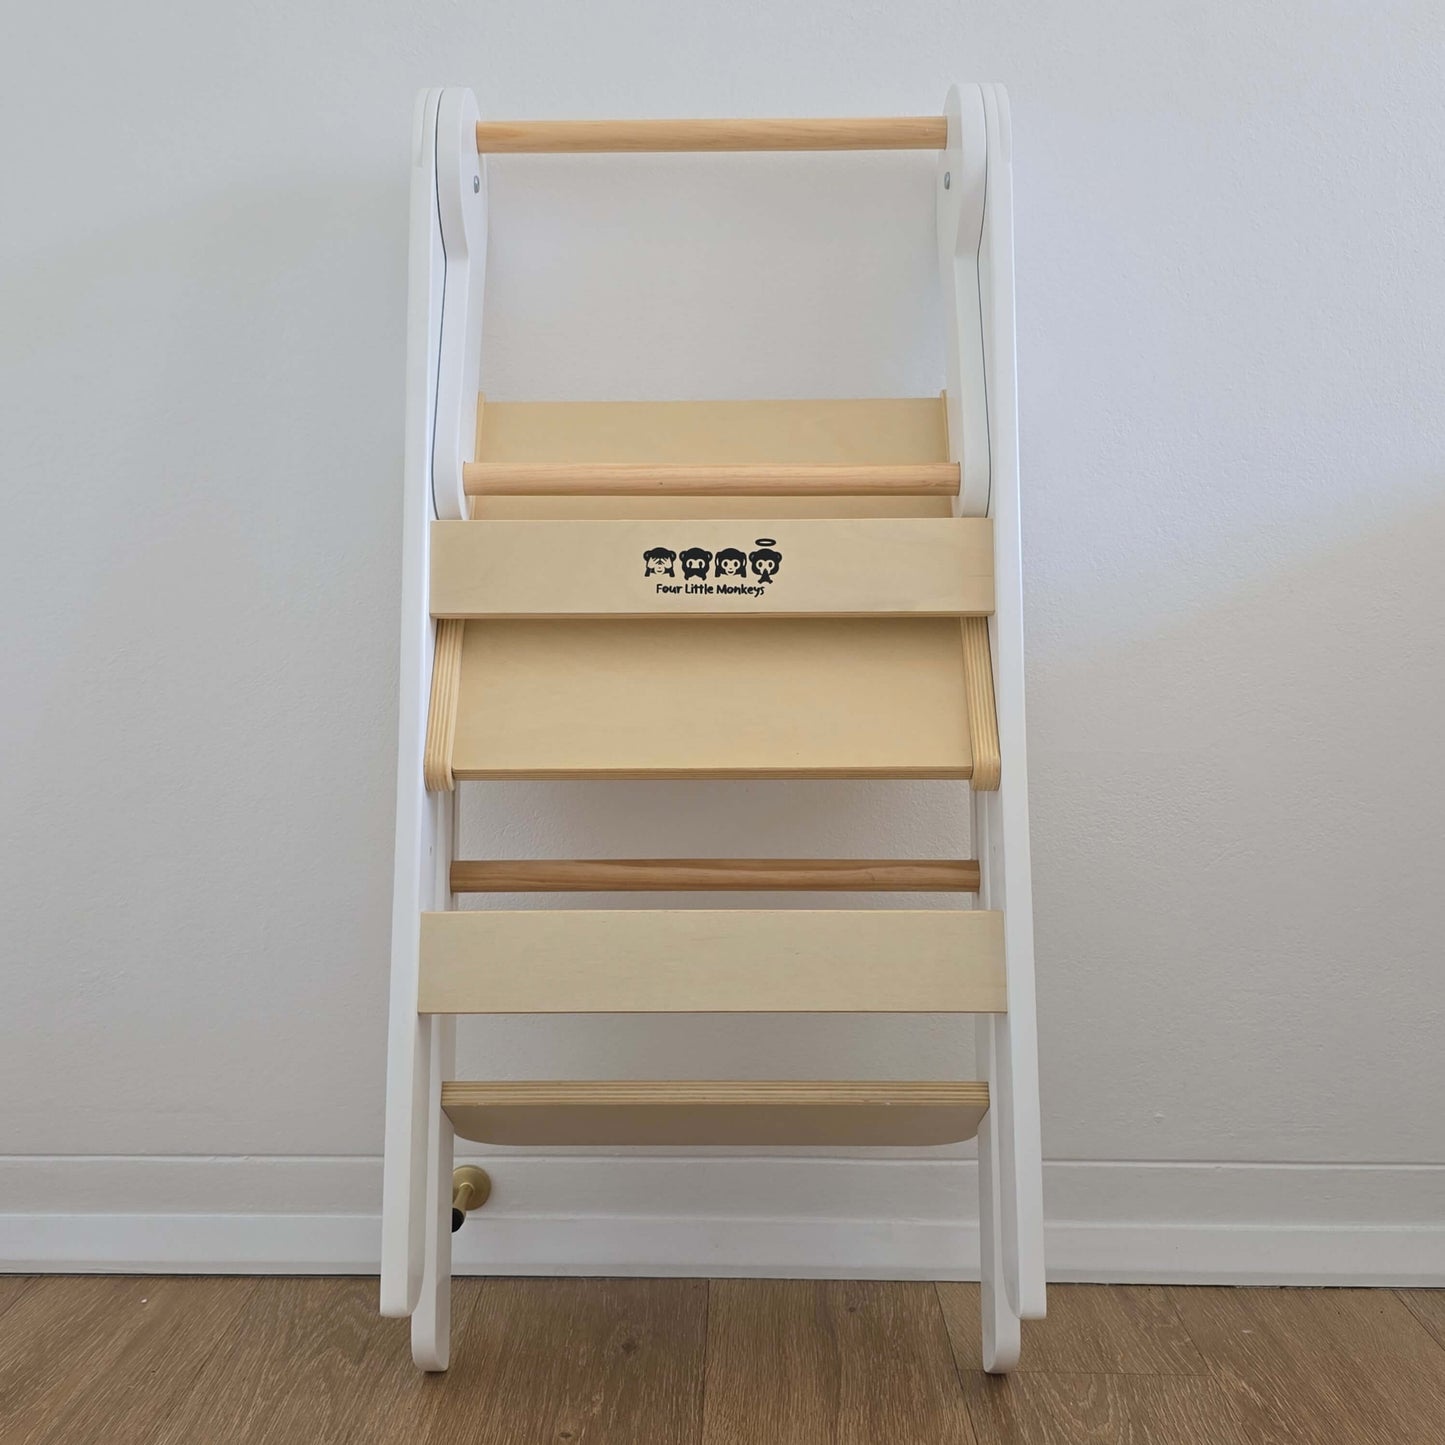 Four Little Monkeys White Adjustable Foldable Learning Tower folded up and leaning against a wall for easy storage.